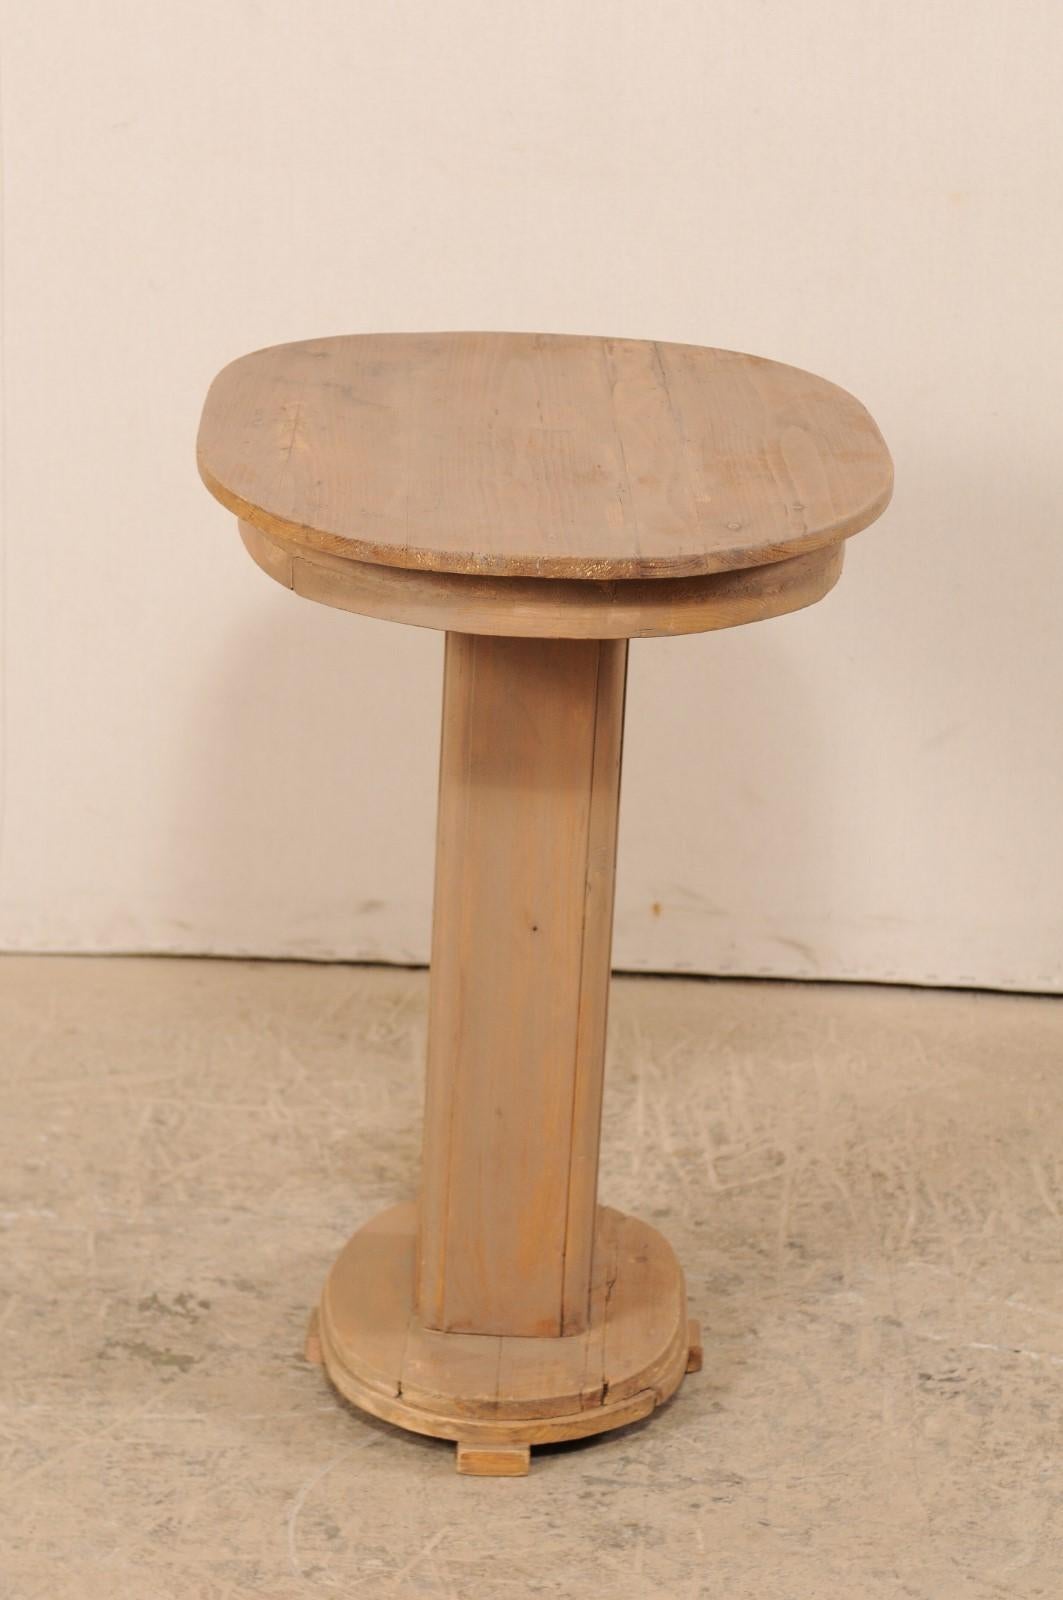 French Mid-20th Century Painted Wood Oval Top Pedestal Table For Sale 1